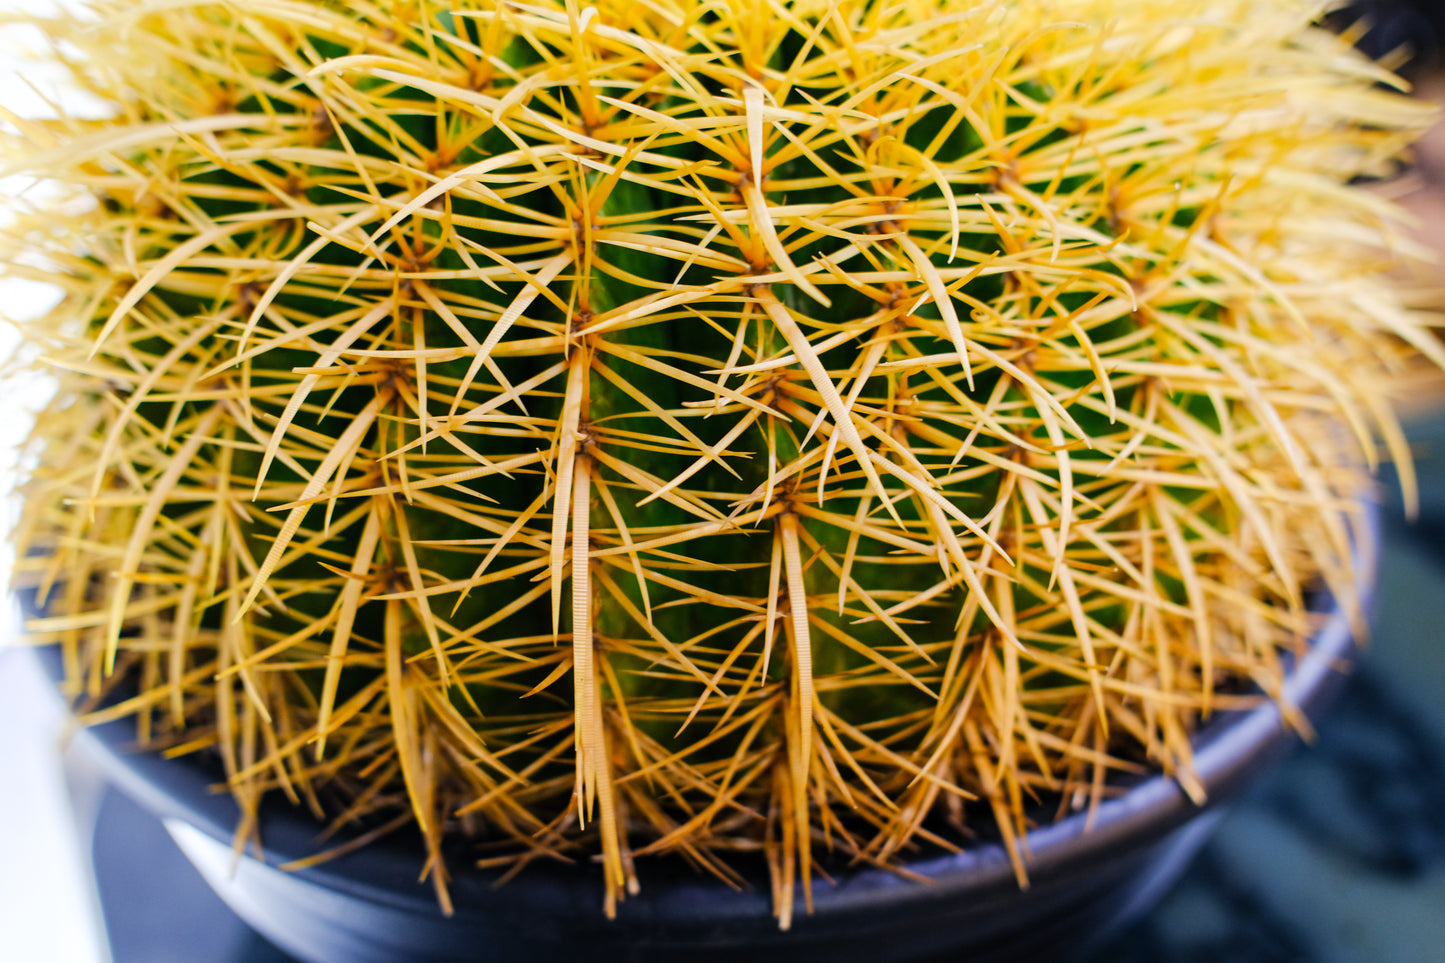 Golden Barrel Cactus (Echinocactus grusonii) in a 12 inch pot. Indoor plant for sale by Promise Supply for delivery and pickup in Toronto